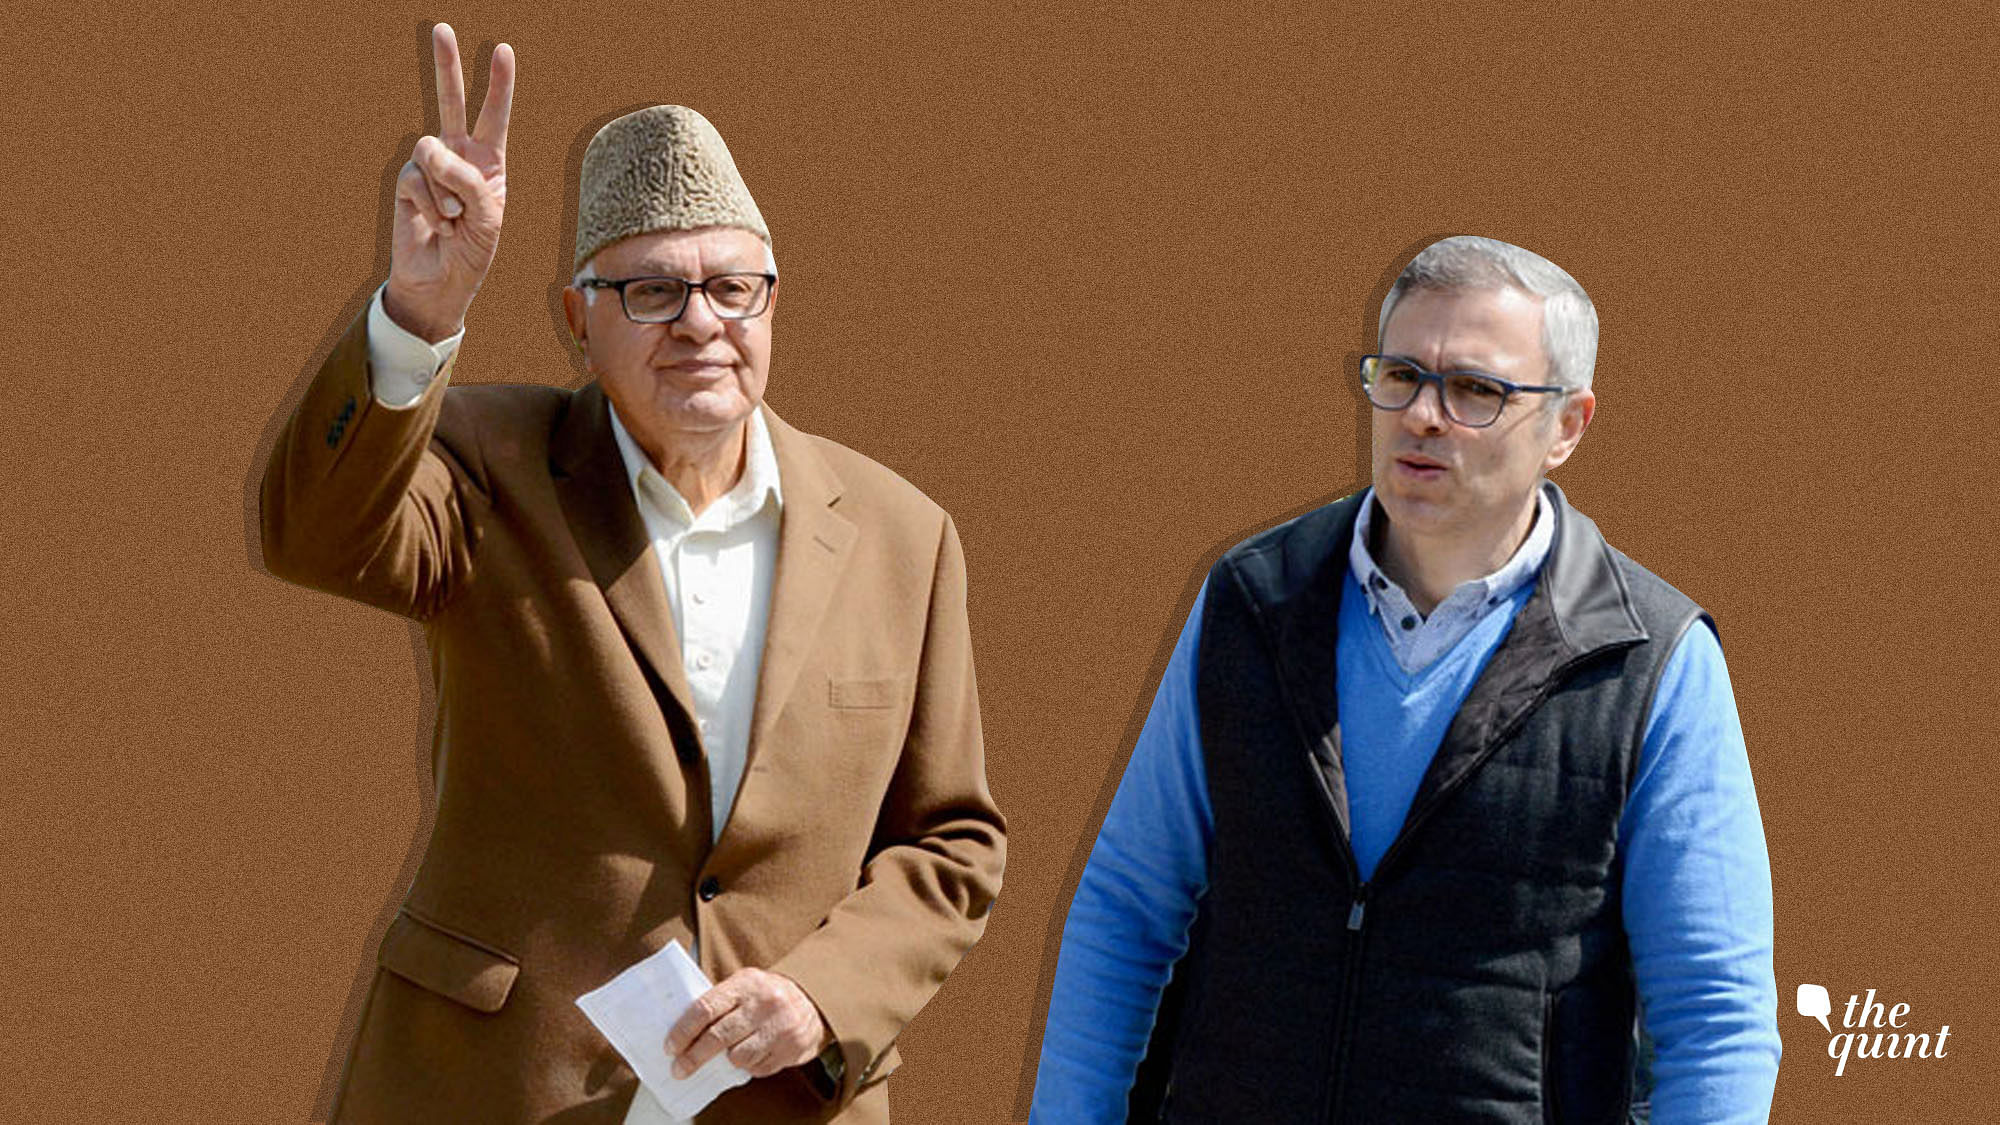 Farooq Abdullah polled 1,06,750 votes, while his his nearest rival PDP candidate Aga Syed Mohsin polled 36,700 votes.